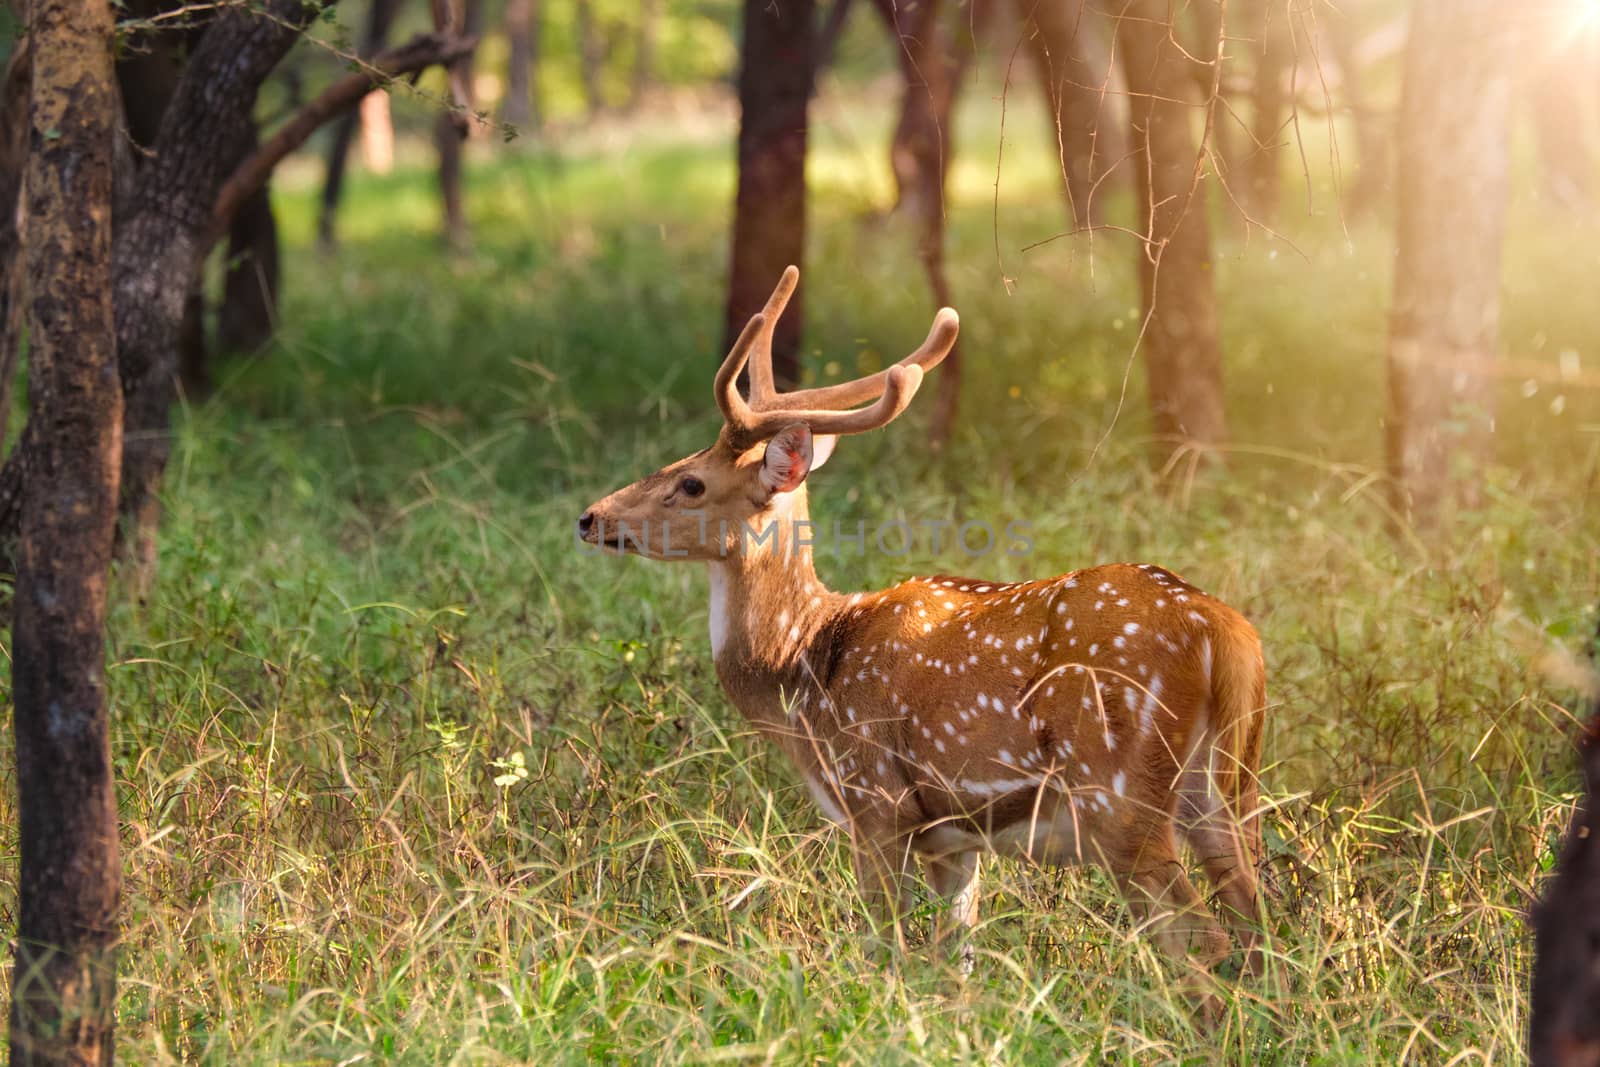 Beautiful young male chital or spotted deer grazing in grass in Ranthambore National Park, Rajasthan, India